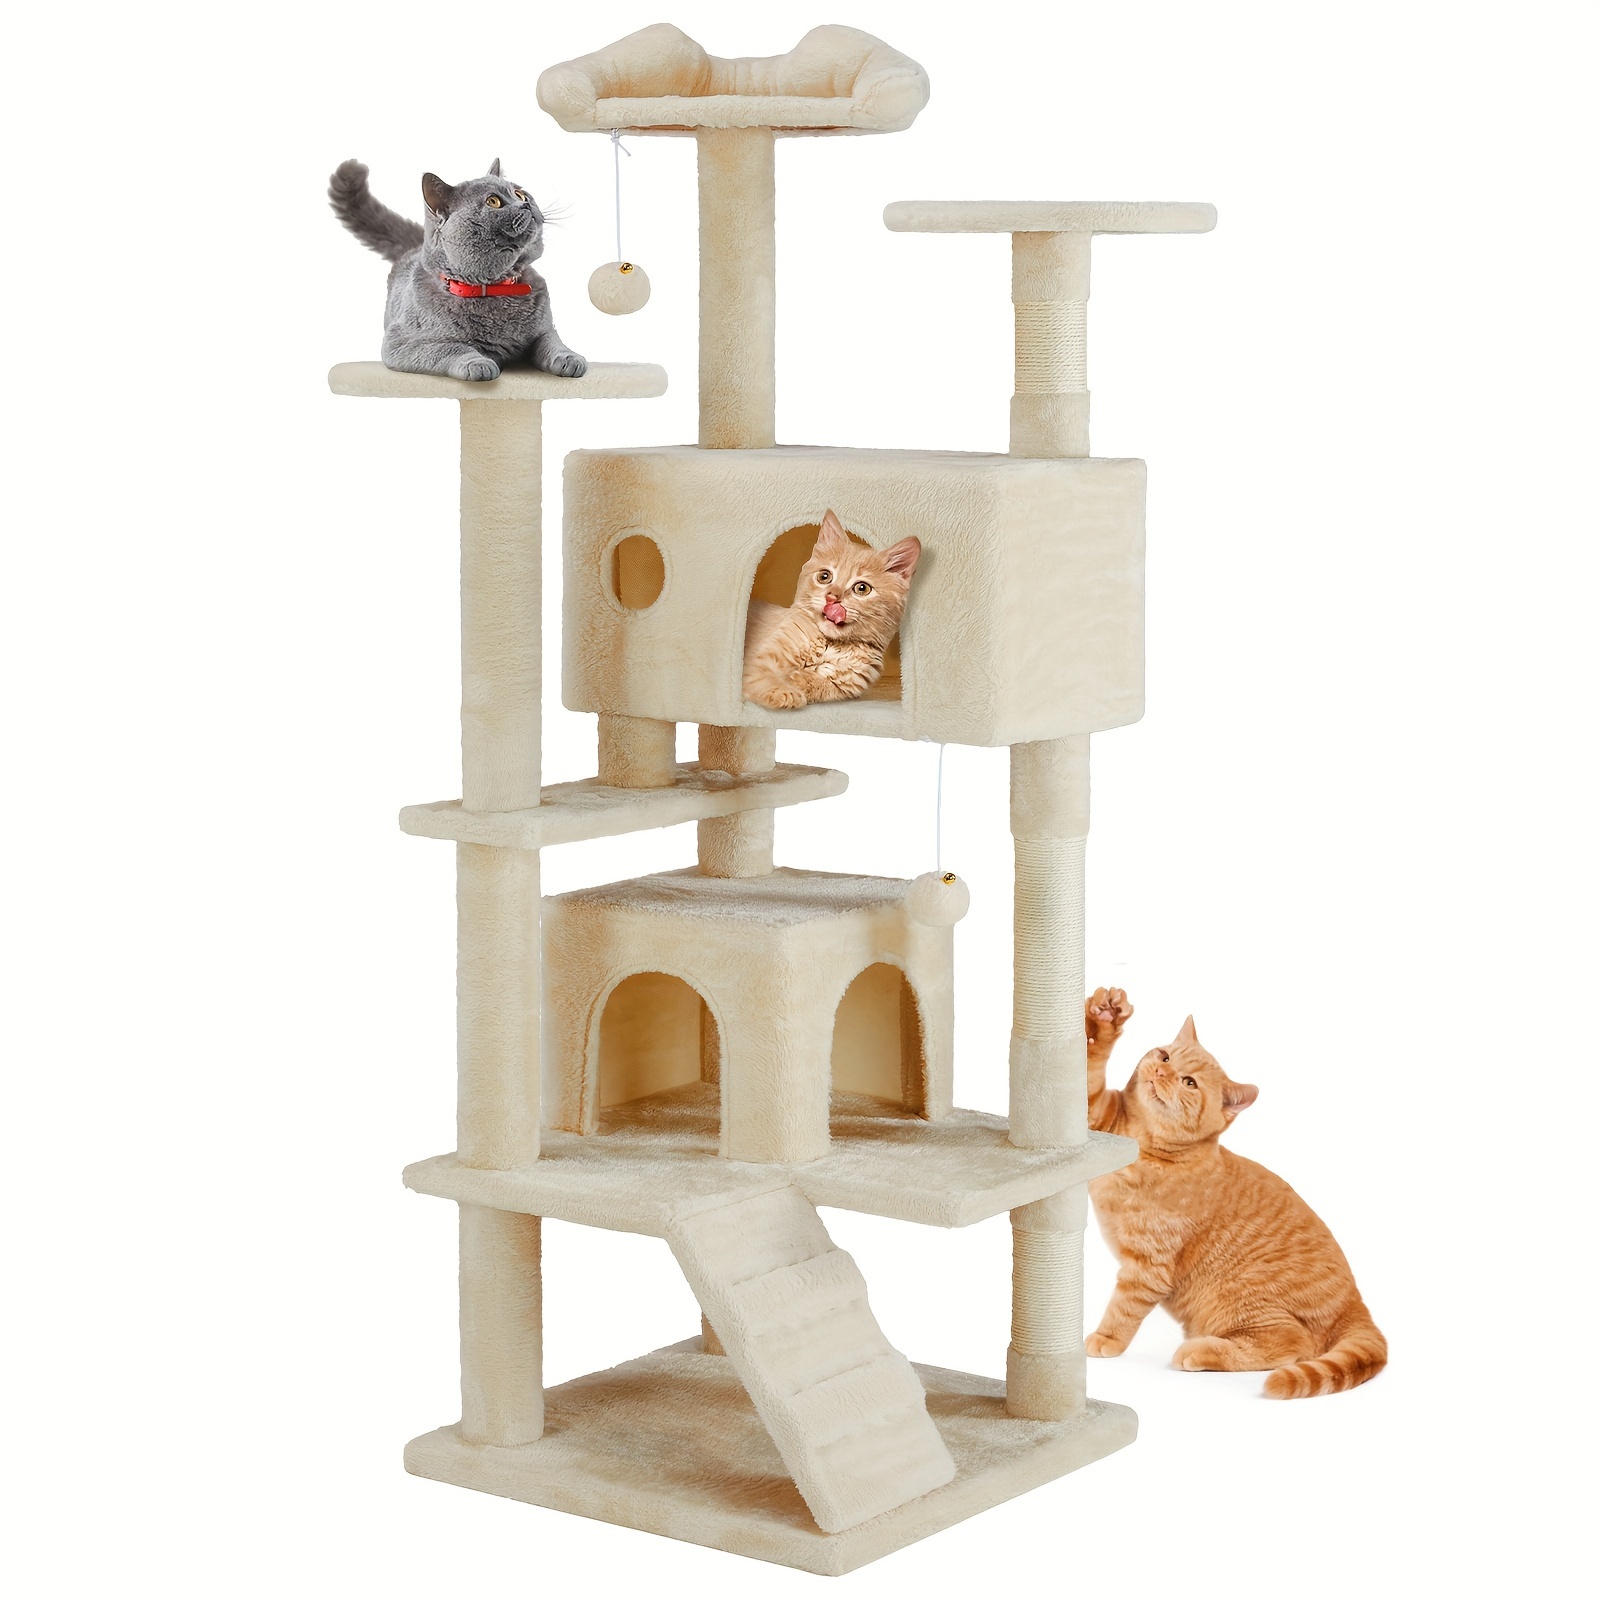 

Smug Indoor Cat Tree Tower, Multi-level Cat Tree For Large Cats, Kitty, Pet House With 2 Condo, Scratching Post, Round Plate, Small Ladder, Cat Tree Toy For All Age Cats, Beige